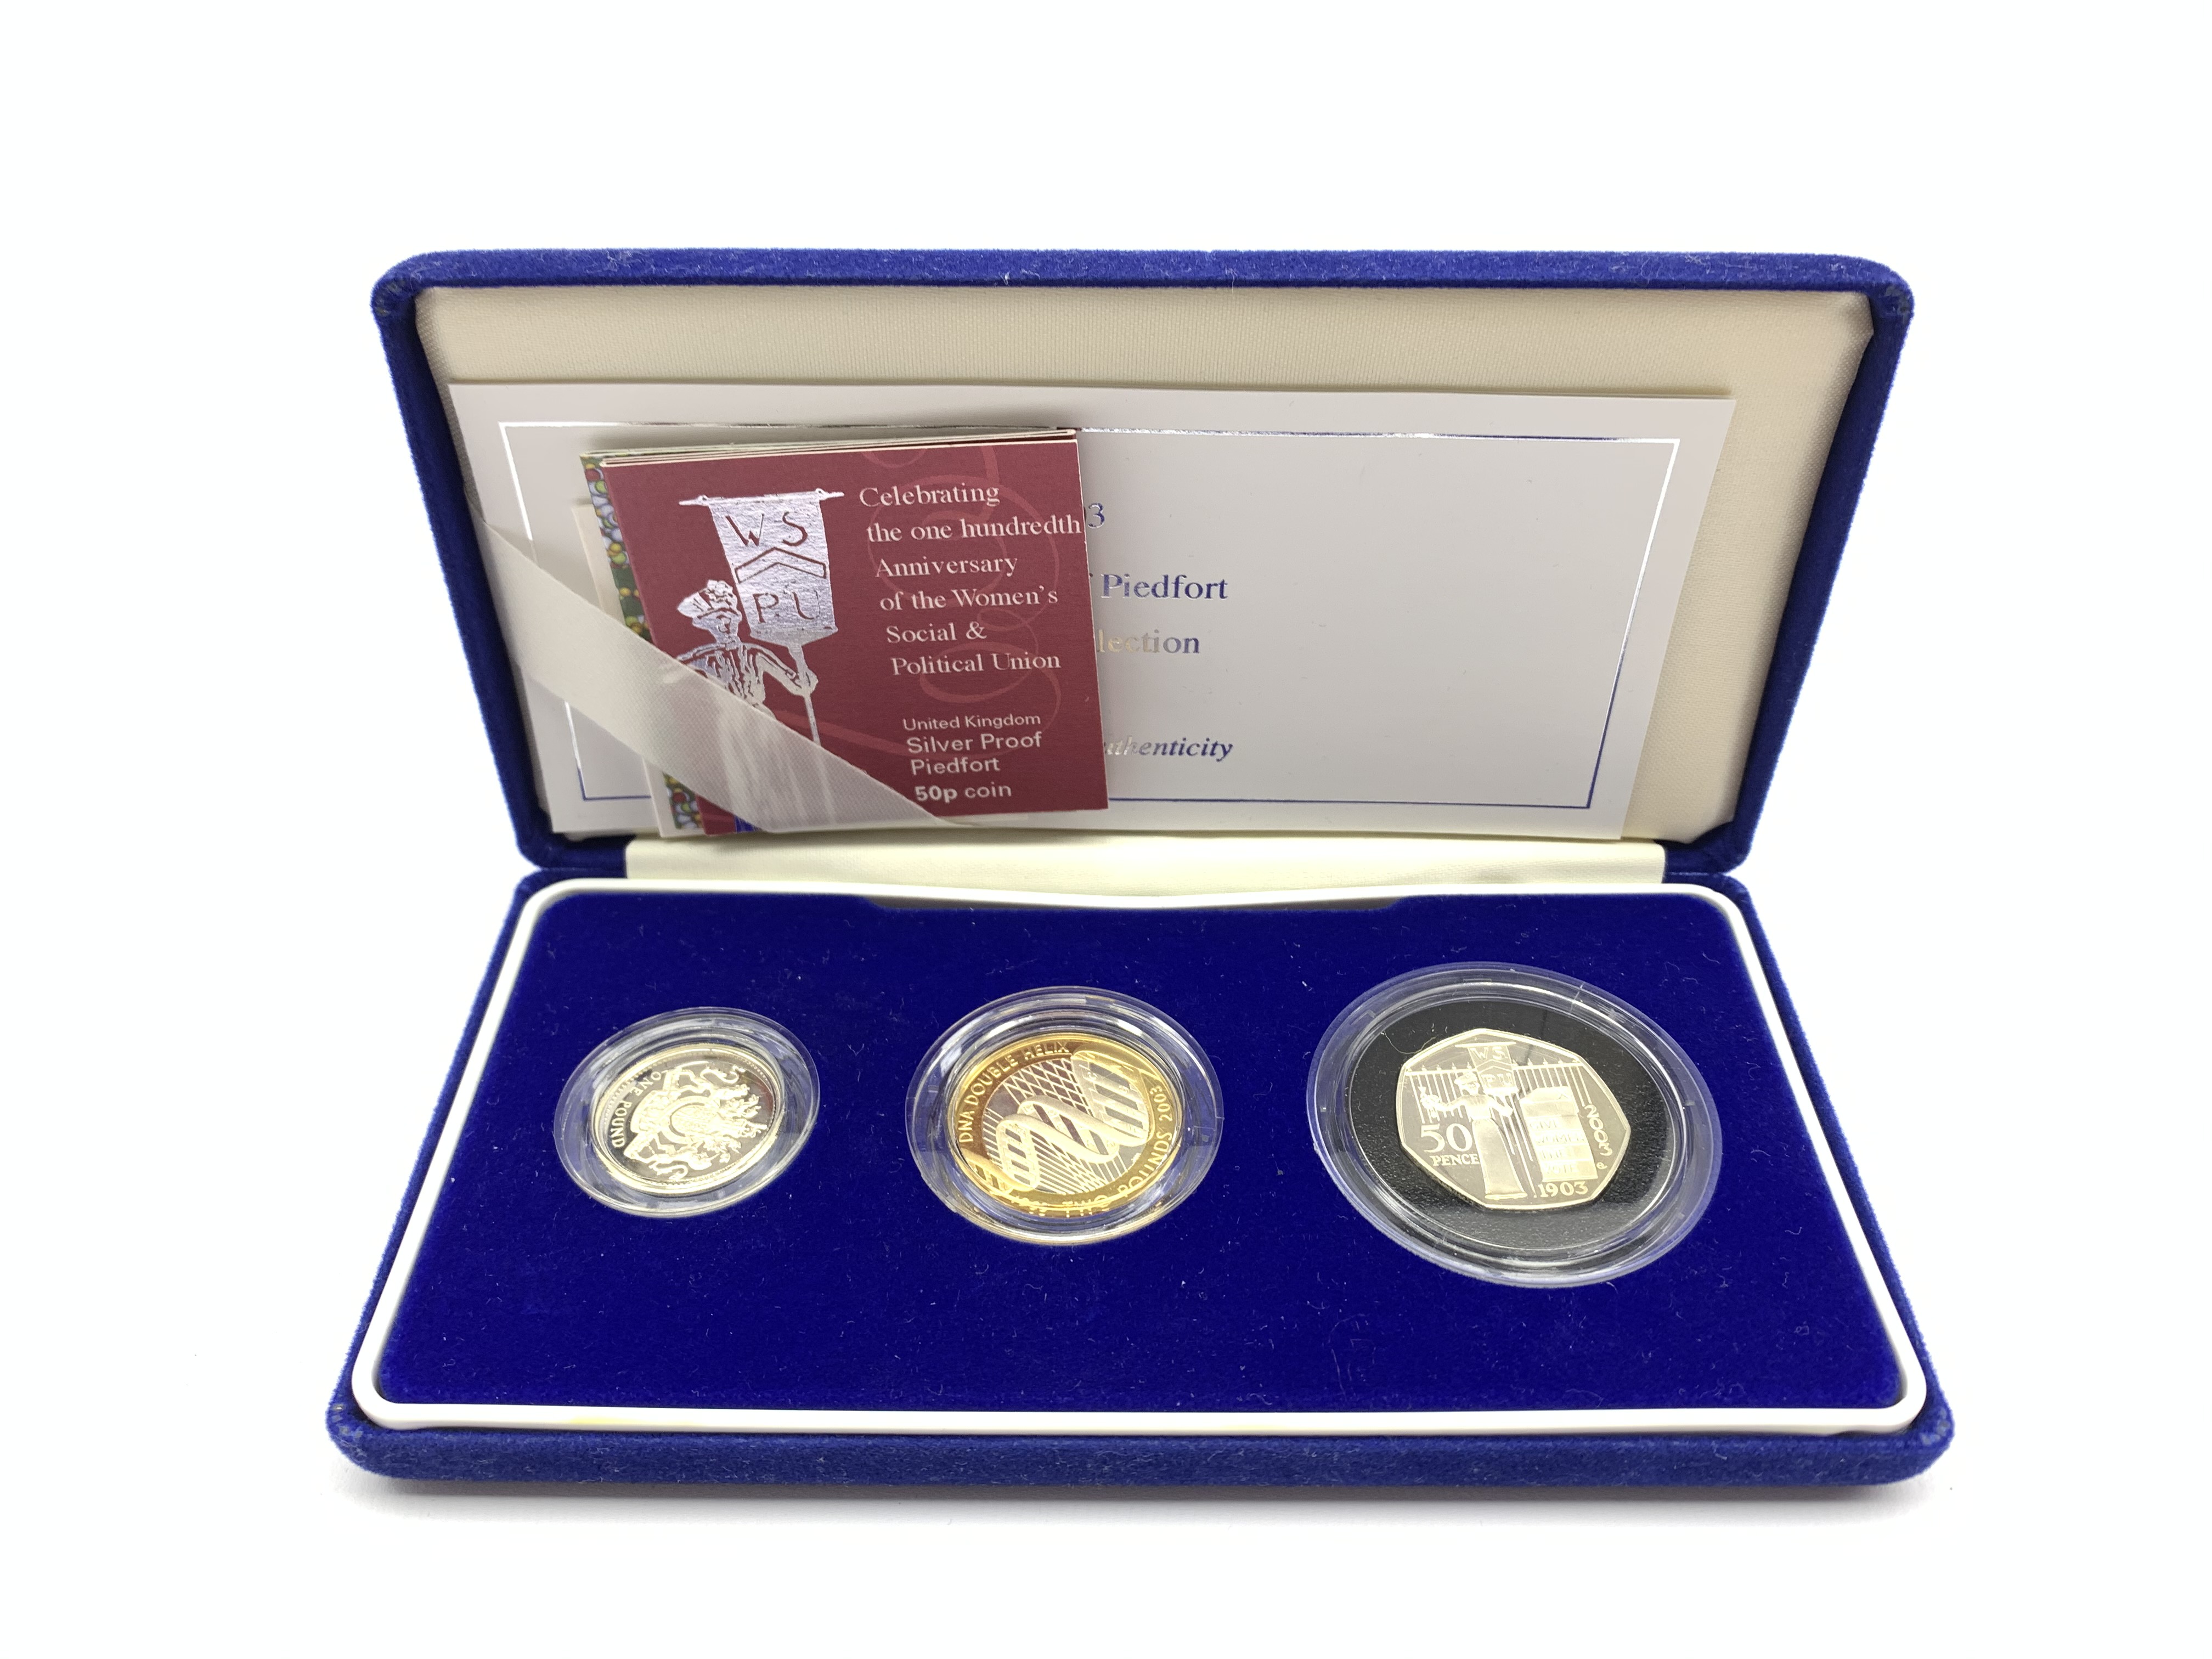 United Kingdom 2003 silver proof piedfort three coin collection,